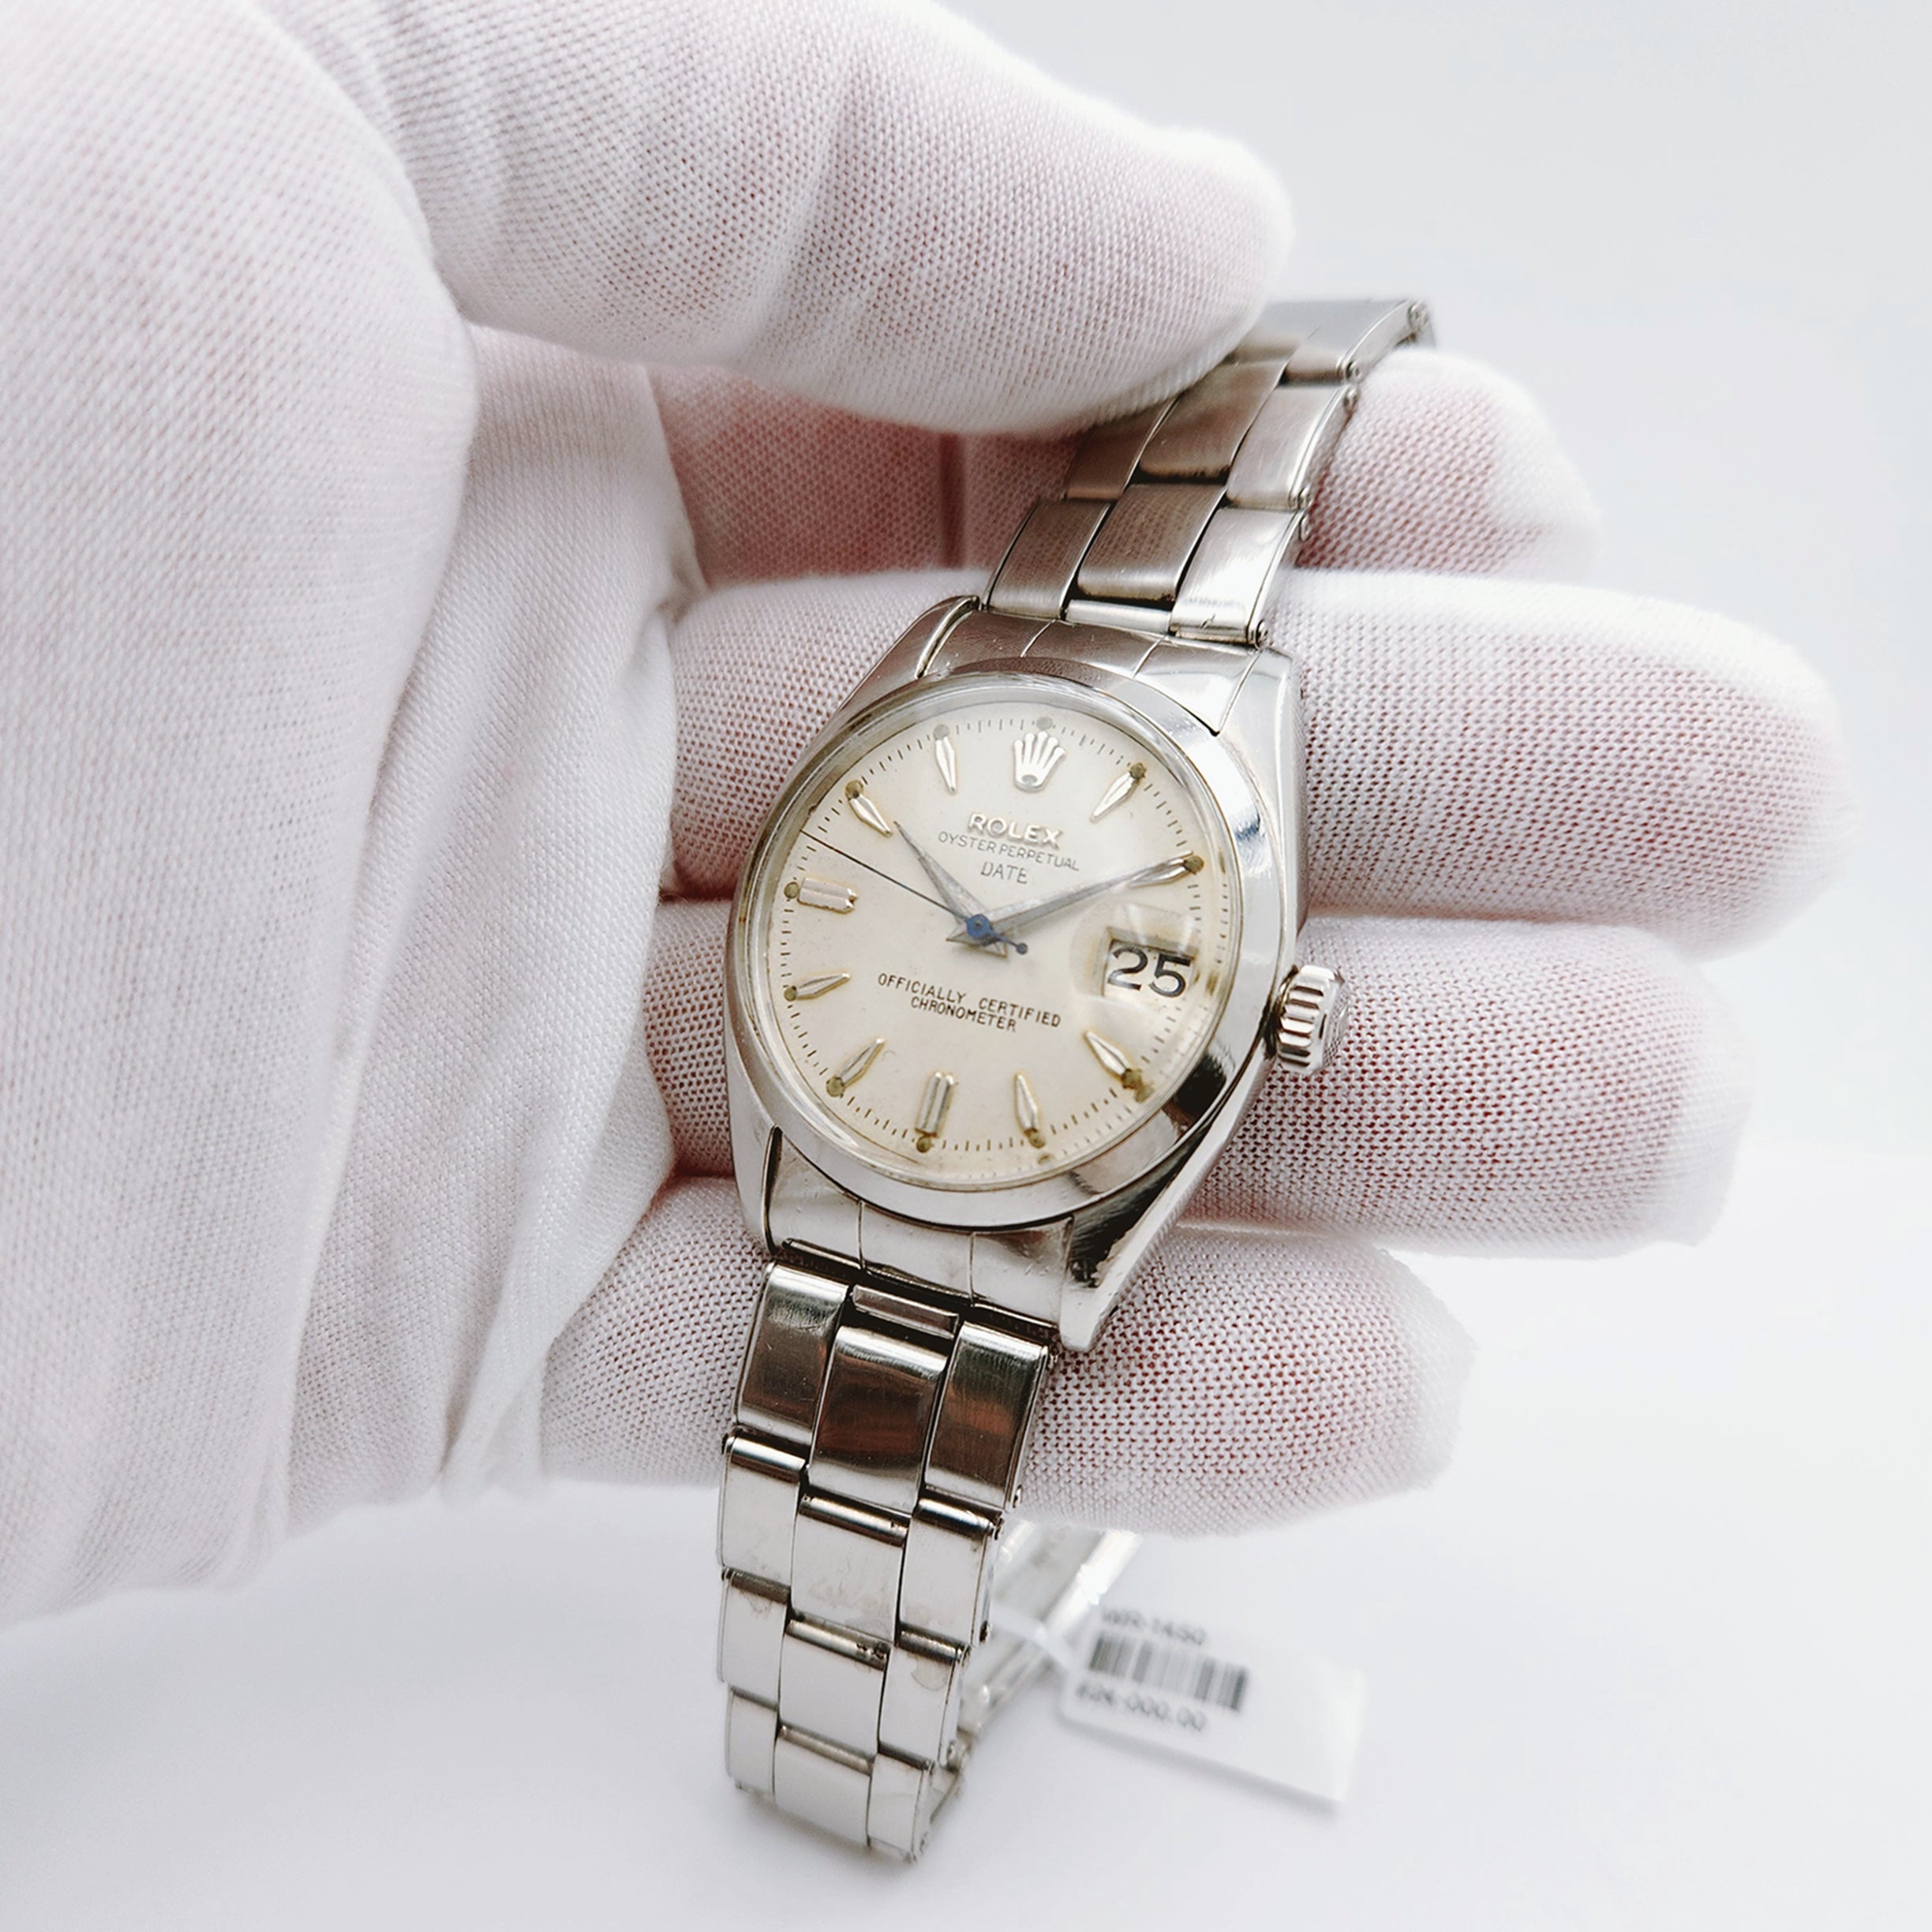 1976 Men's Rolex 34mm Date Vintage Stainless Steel Watch with Cream Dial and Smooth Bezel. (Pre-Owned 6534)